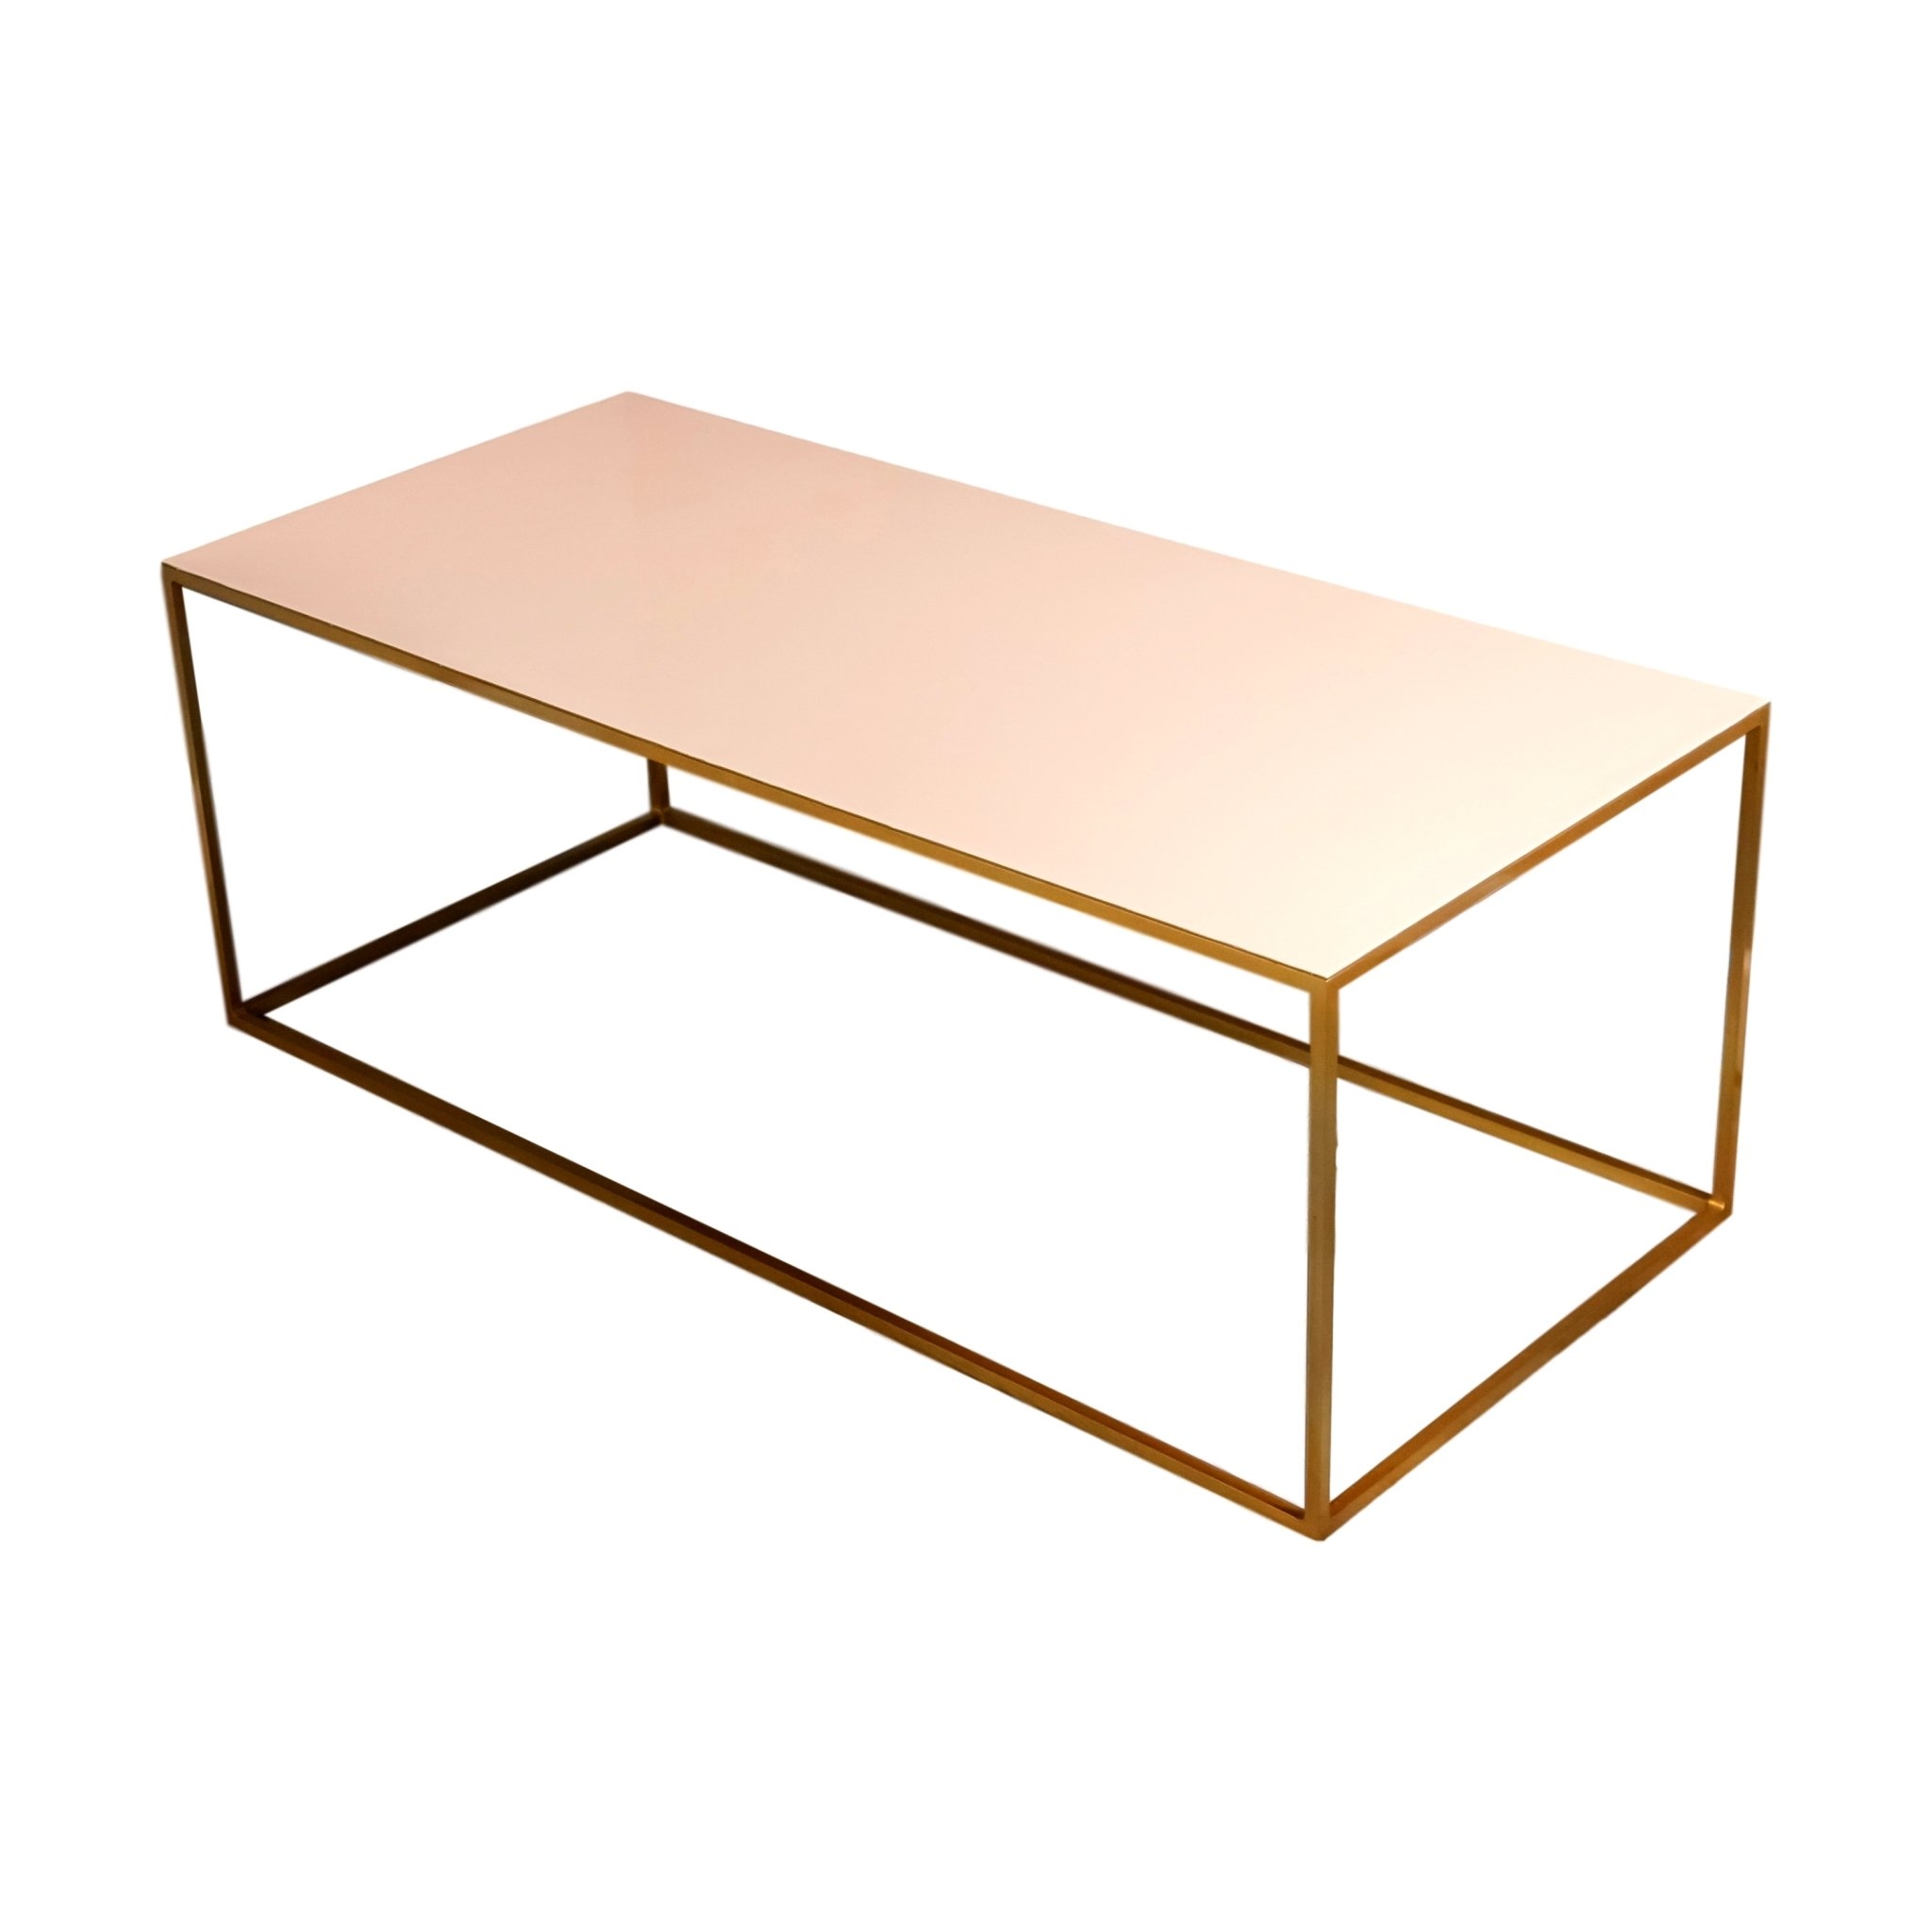 Native Home & Lifestyle Coffee Table In Pink and Gold 110 x 50 x 40cm – Furniture & Homeware – The Luxe Home